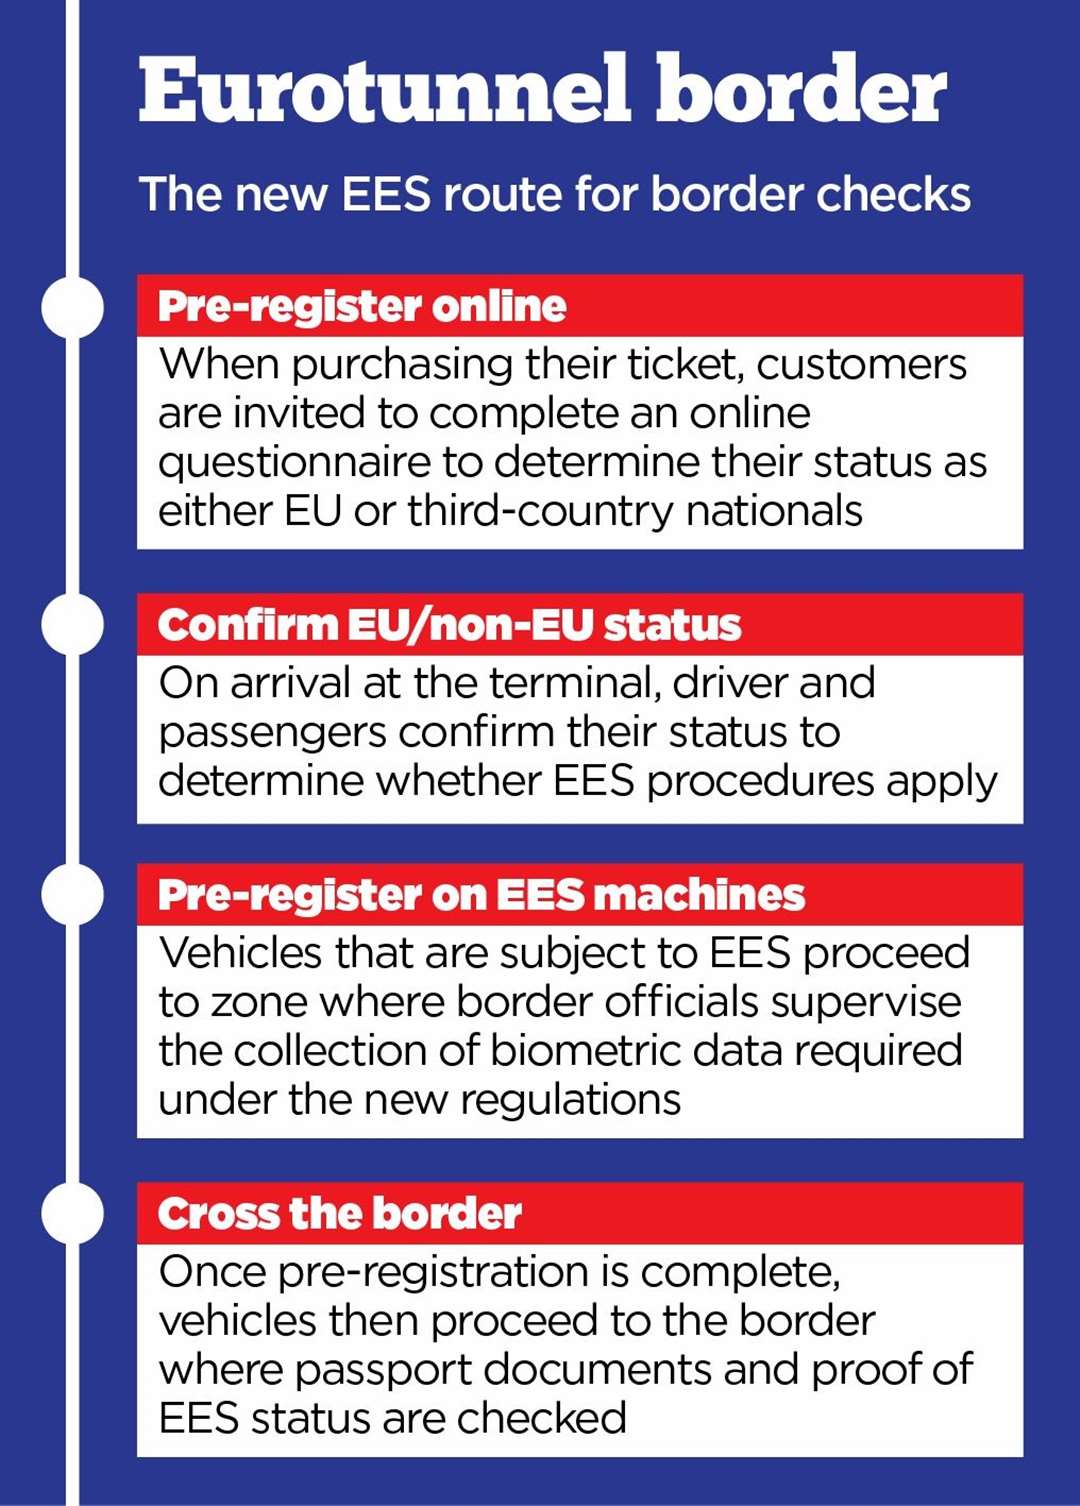 How Eurotunnel's EES border process will work